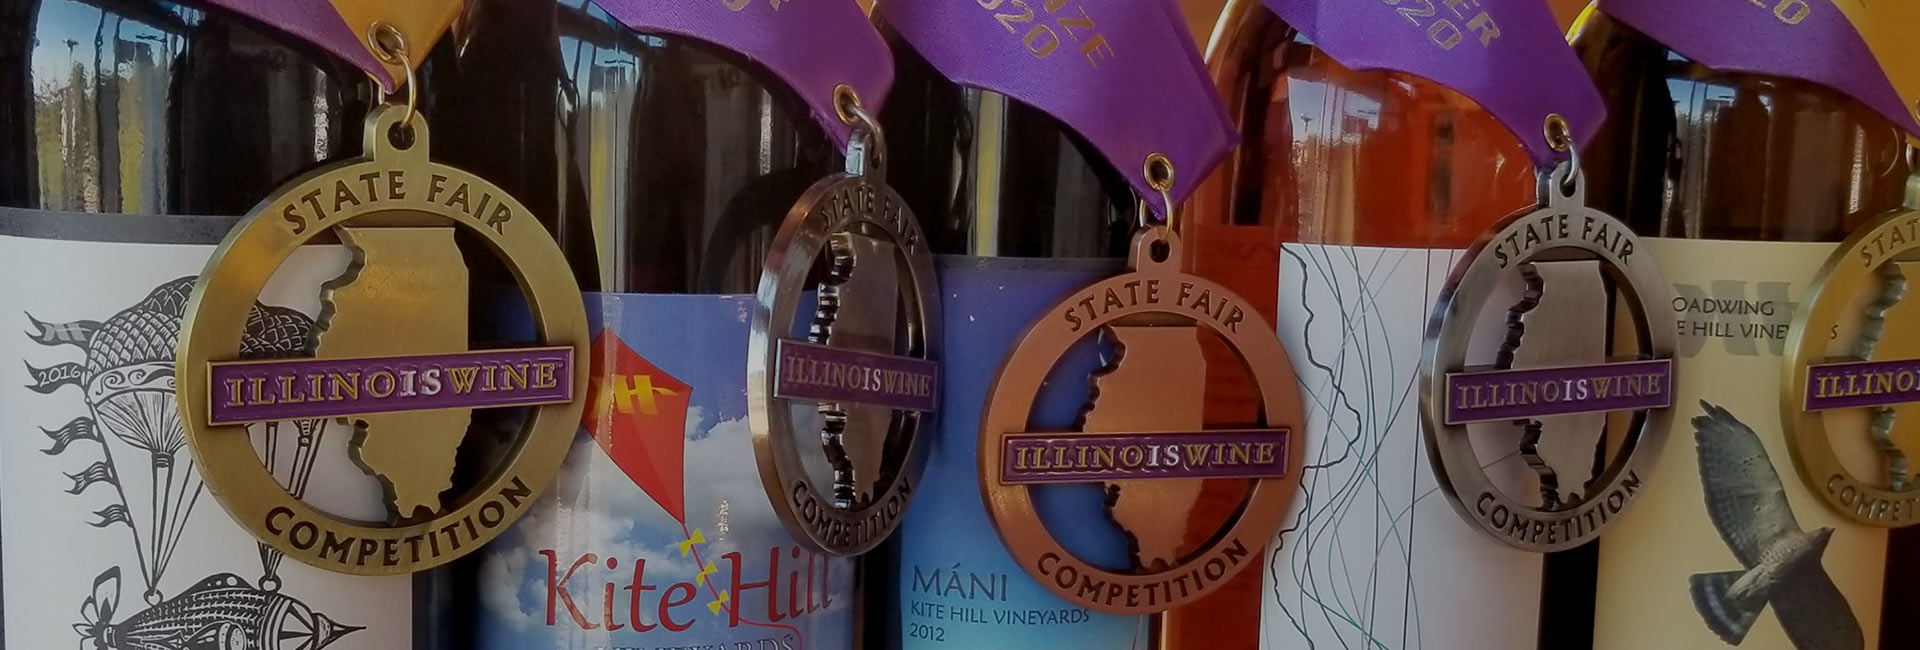 Award winning wine bottles with medals